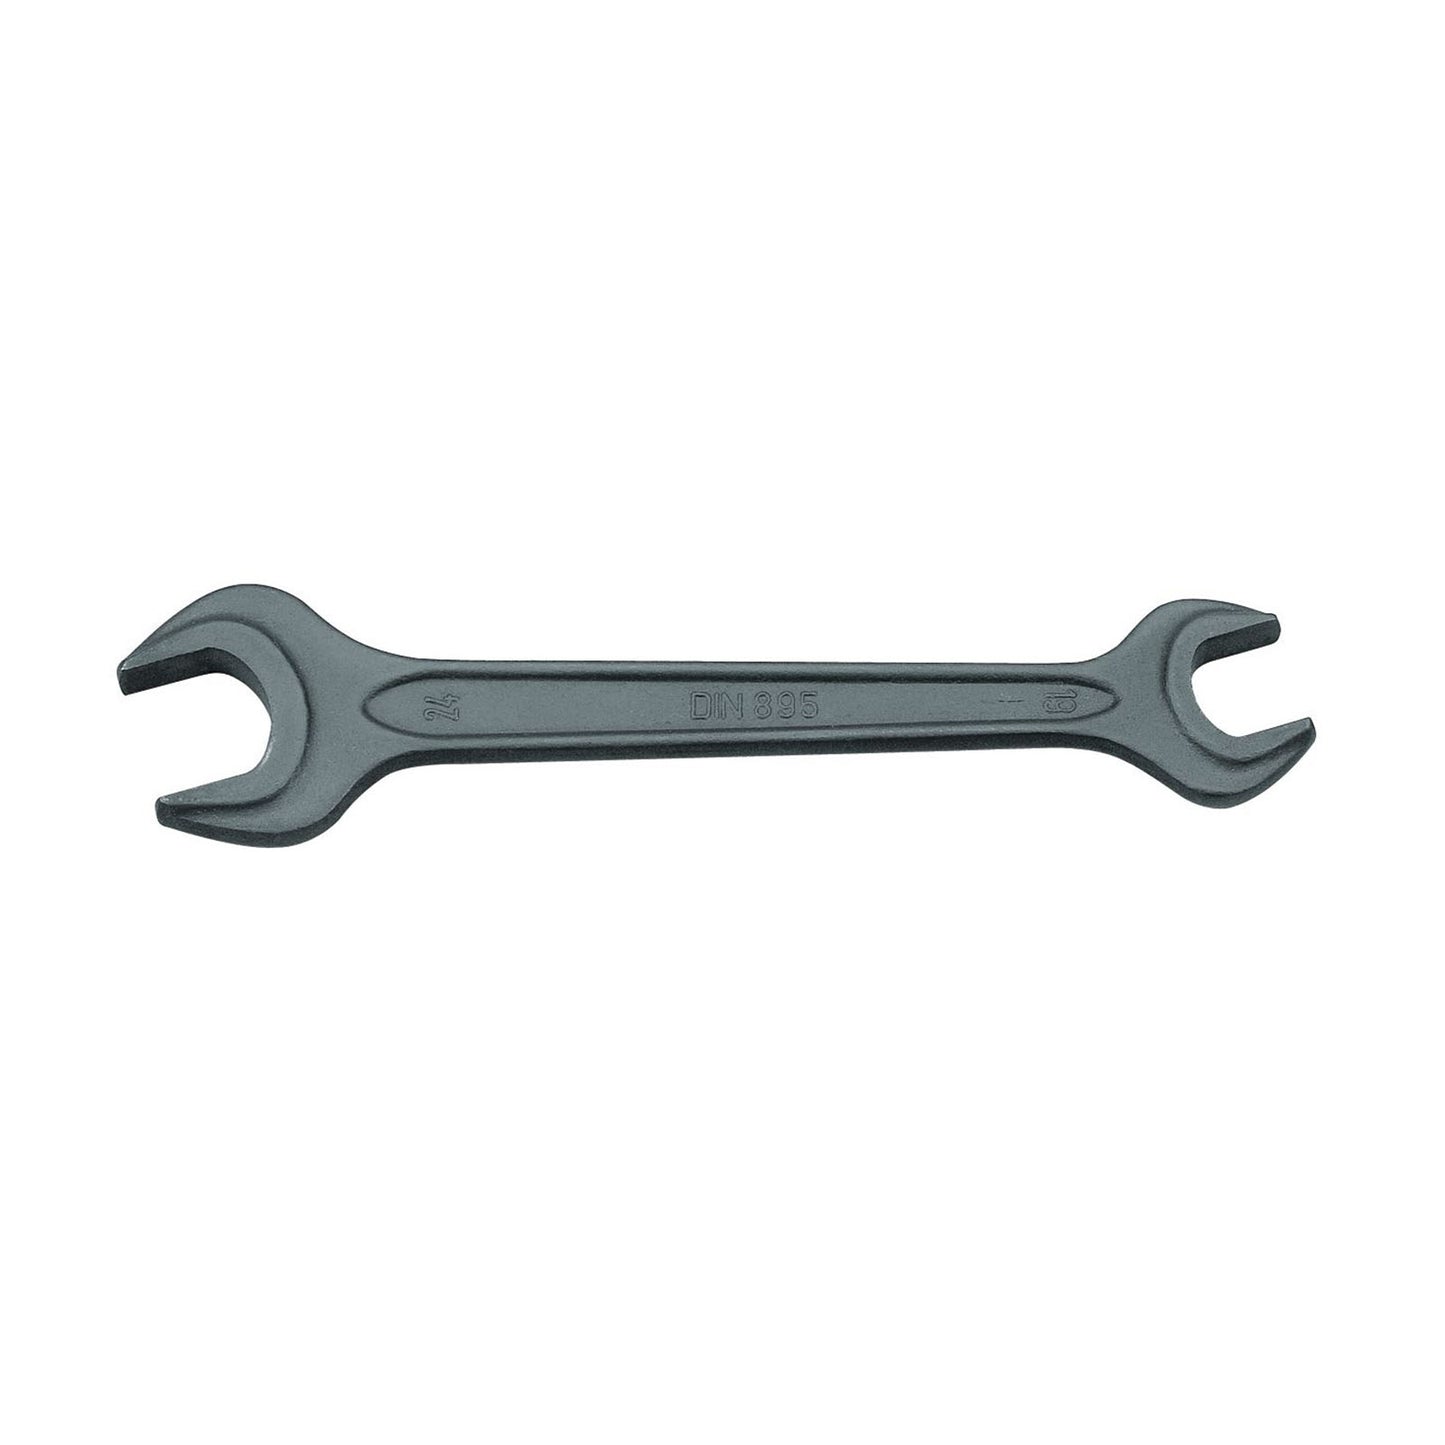 GEDORE 895 22X27 - 2-Mount Fixed Wrench, 22x27 (6587150)